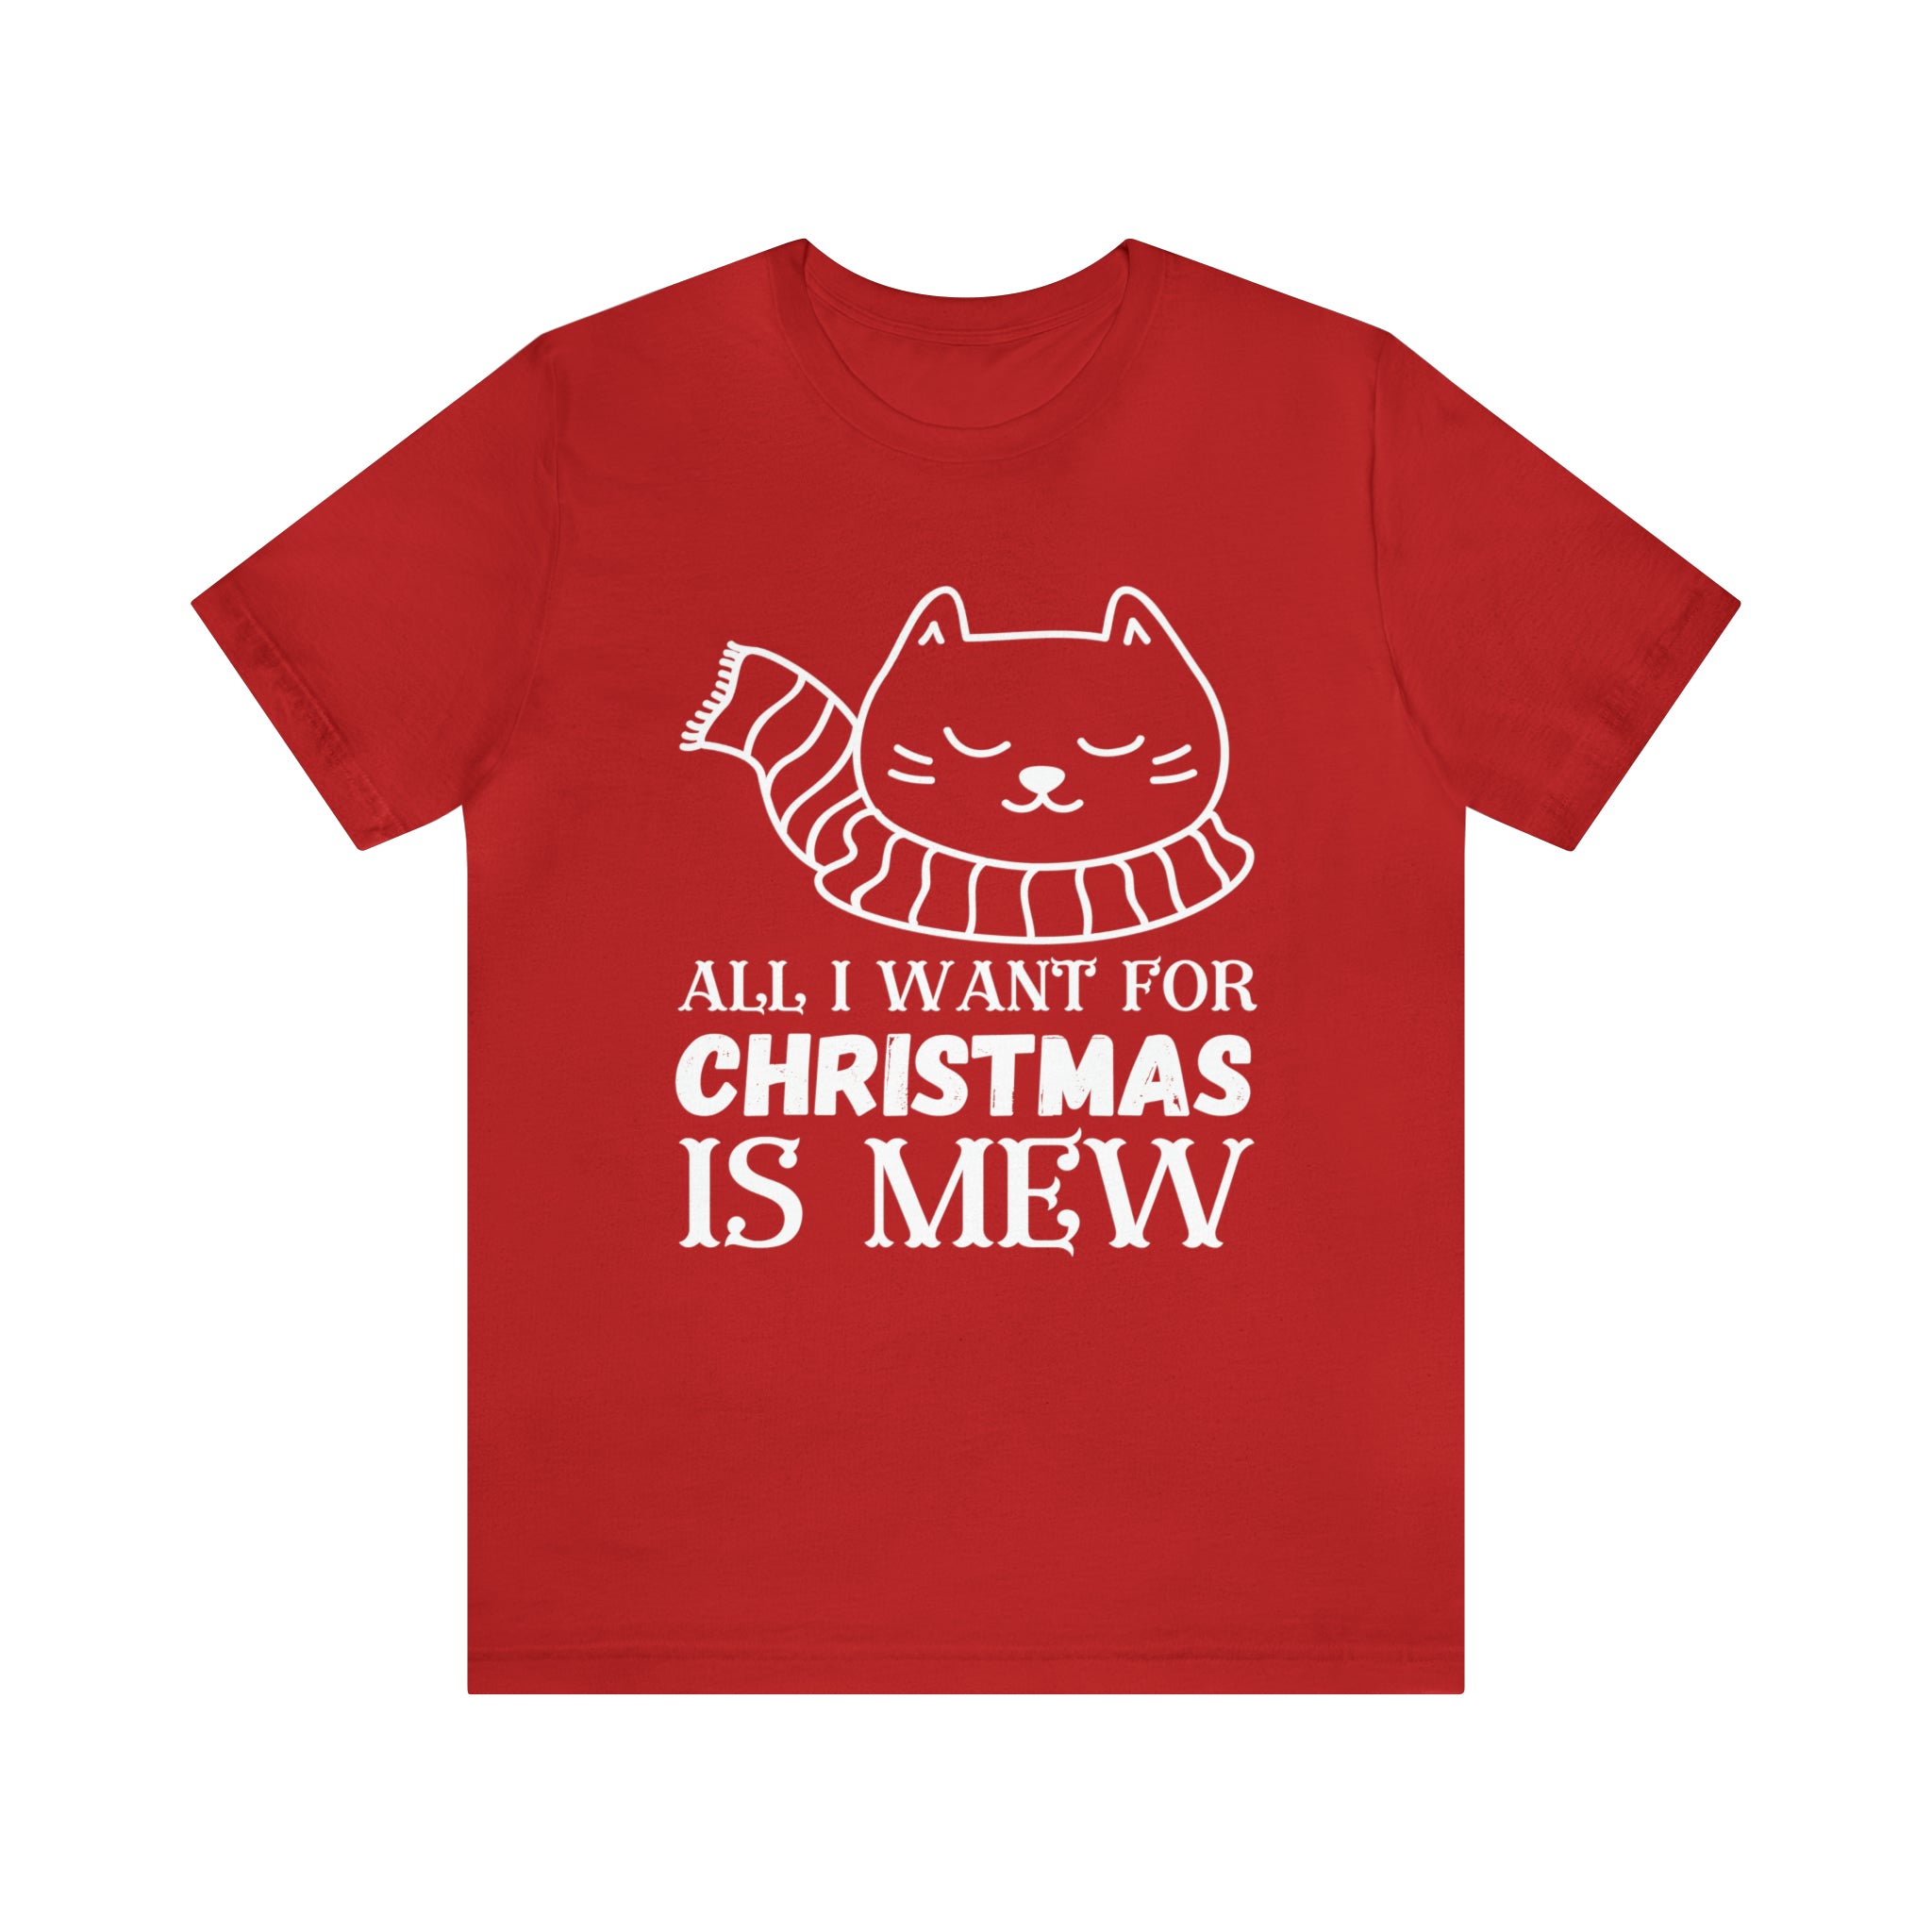 All I want for Christmas is Mew tshirt